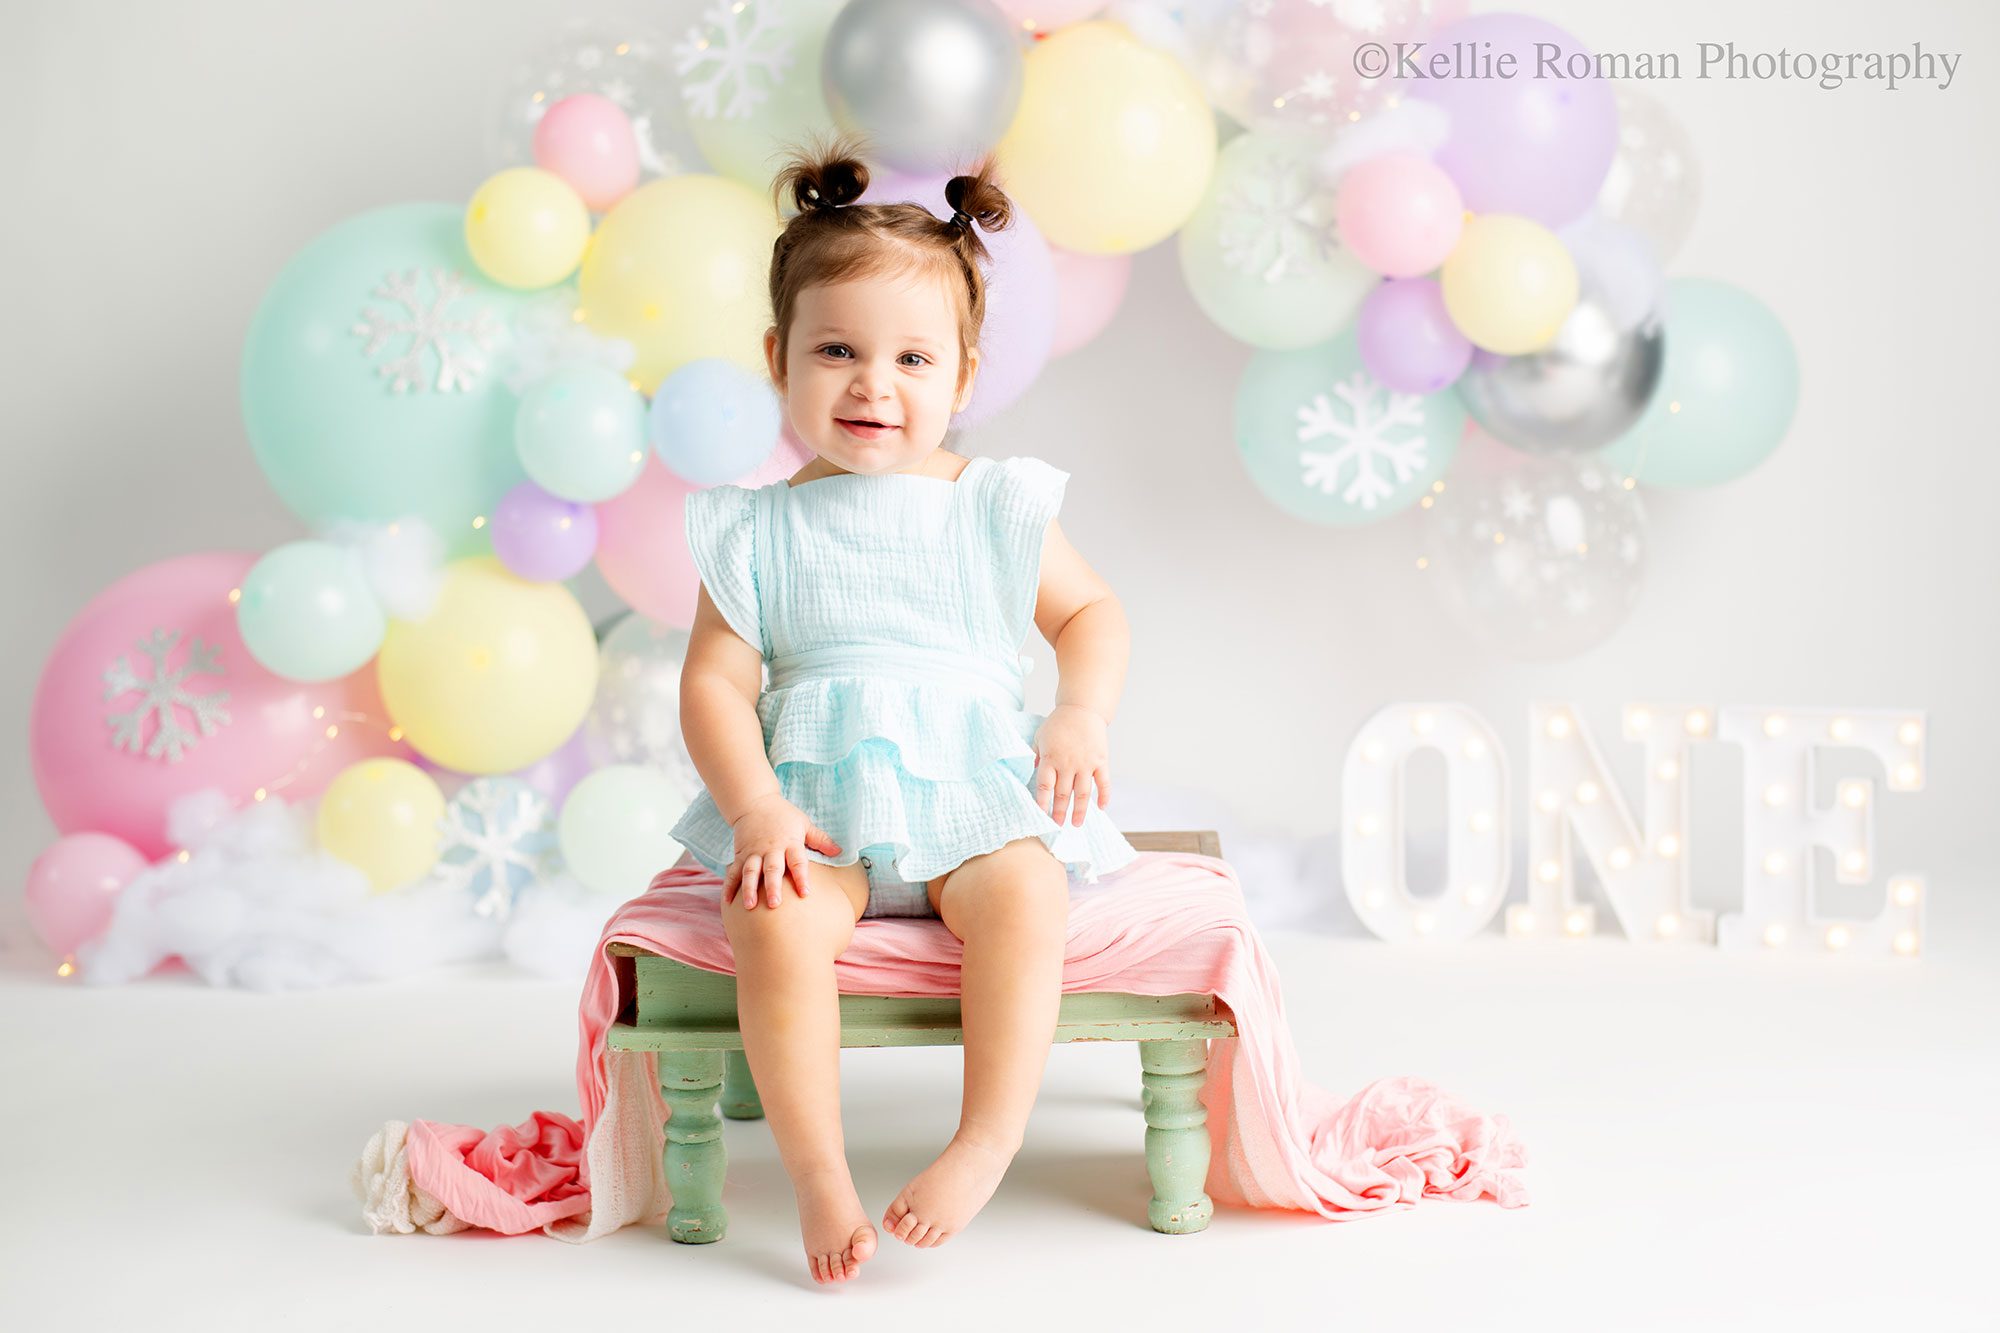 Milwaukee pastel cake smash. one year old girl sitting on a teal wood bench with pink fabric over it. she has a light blue romper on and pigtails in her hair. she's smiling. the background is a pastel balloon garland with little lights and snowflakes.